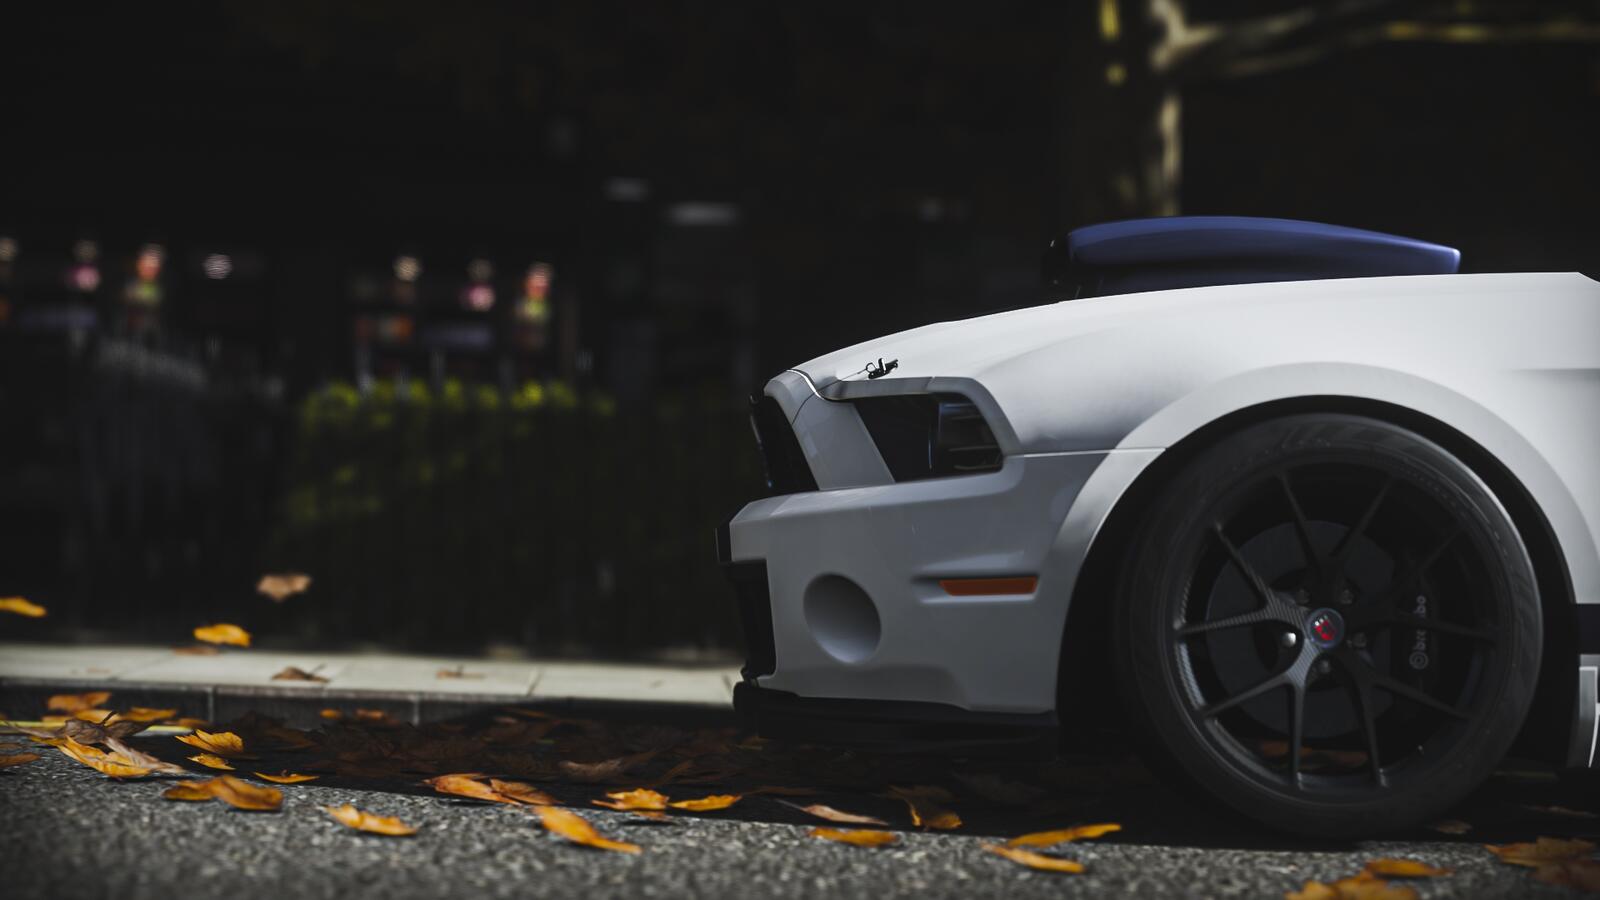 Wallpapers wallpaper ford mustang shelby gt500 Forza Horizon 4 racing games on the desktop